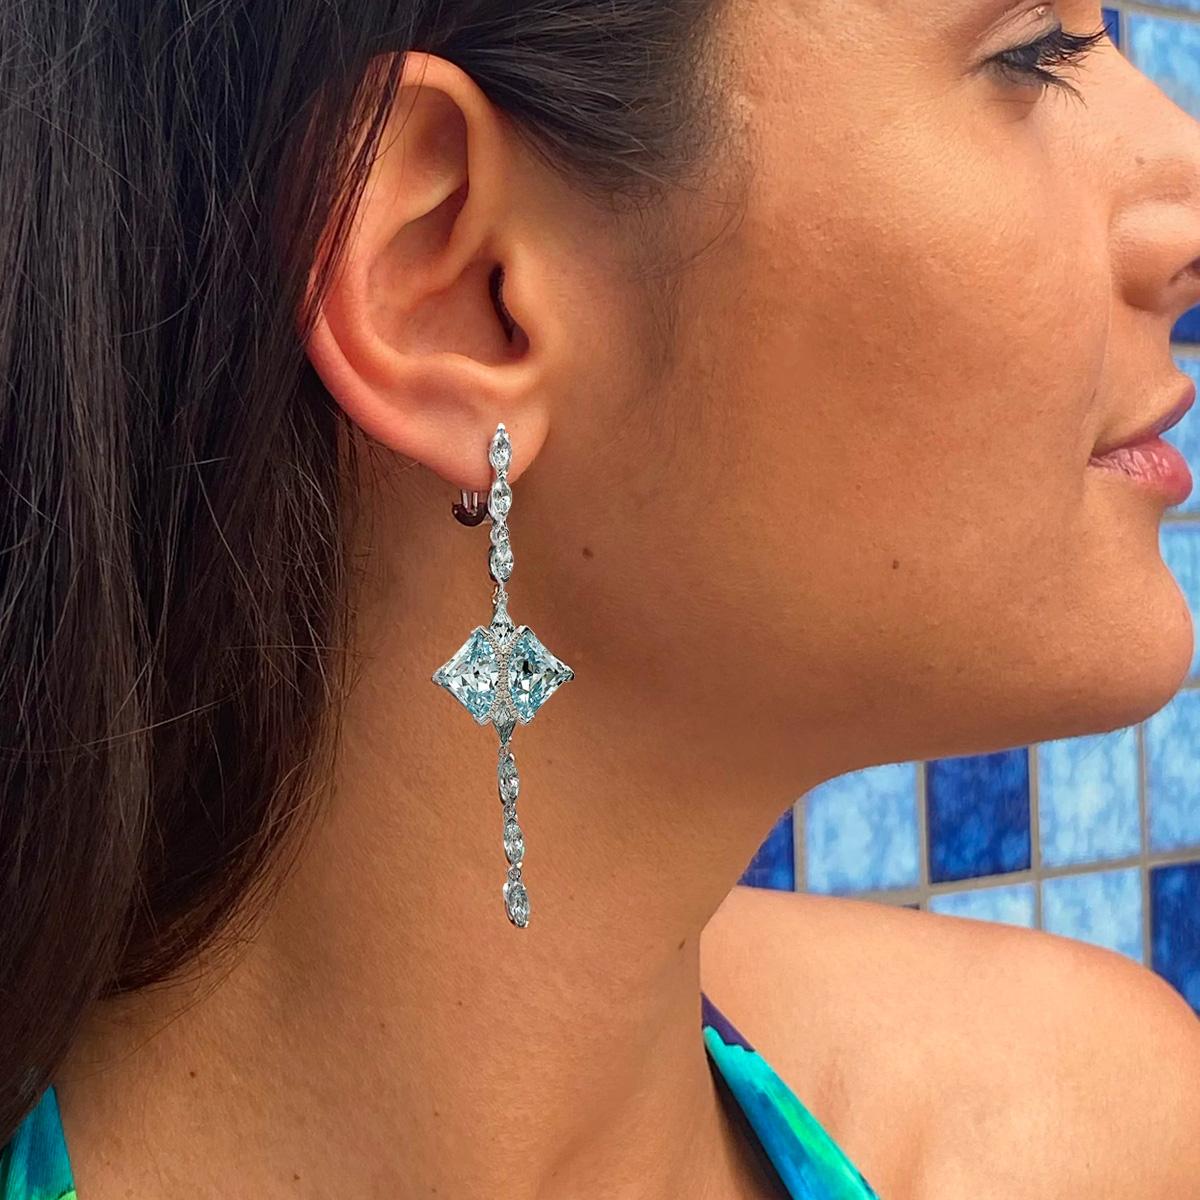 The magnificent eagle ray never fails to inspire us. A symbol of wisdom and grace, this elegant creature is a spirit guardian. Directly inspired by the ray’s form, the earrings are crafted with an assortment of fancy cut aquamarine sapphires. The